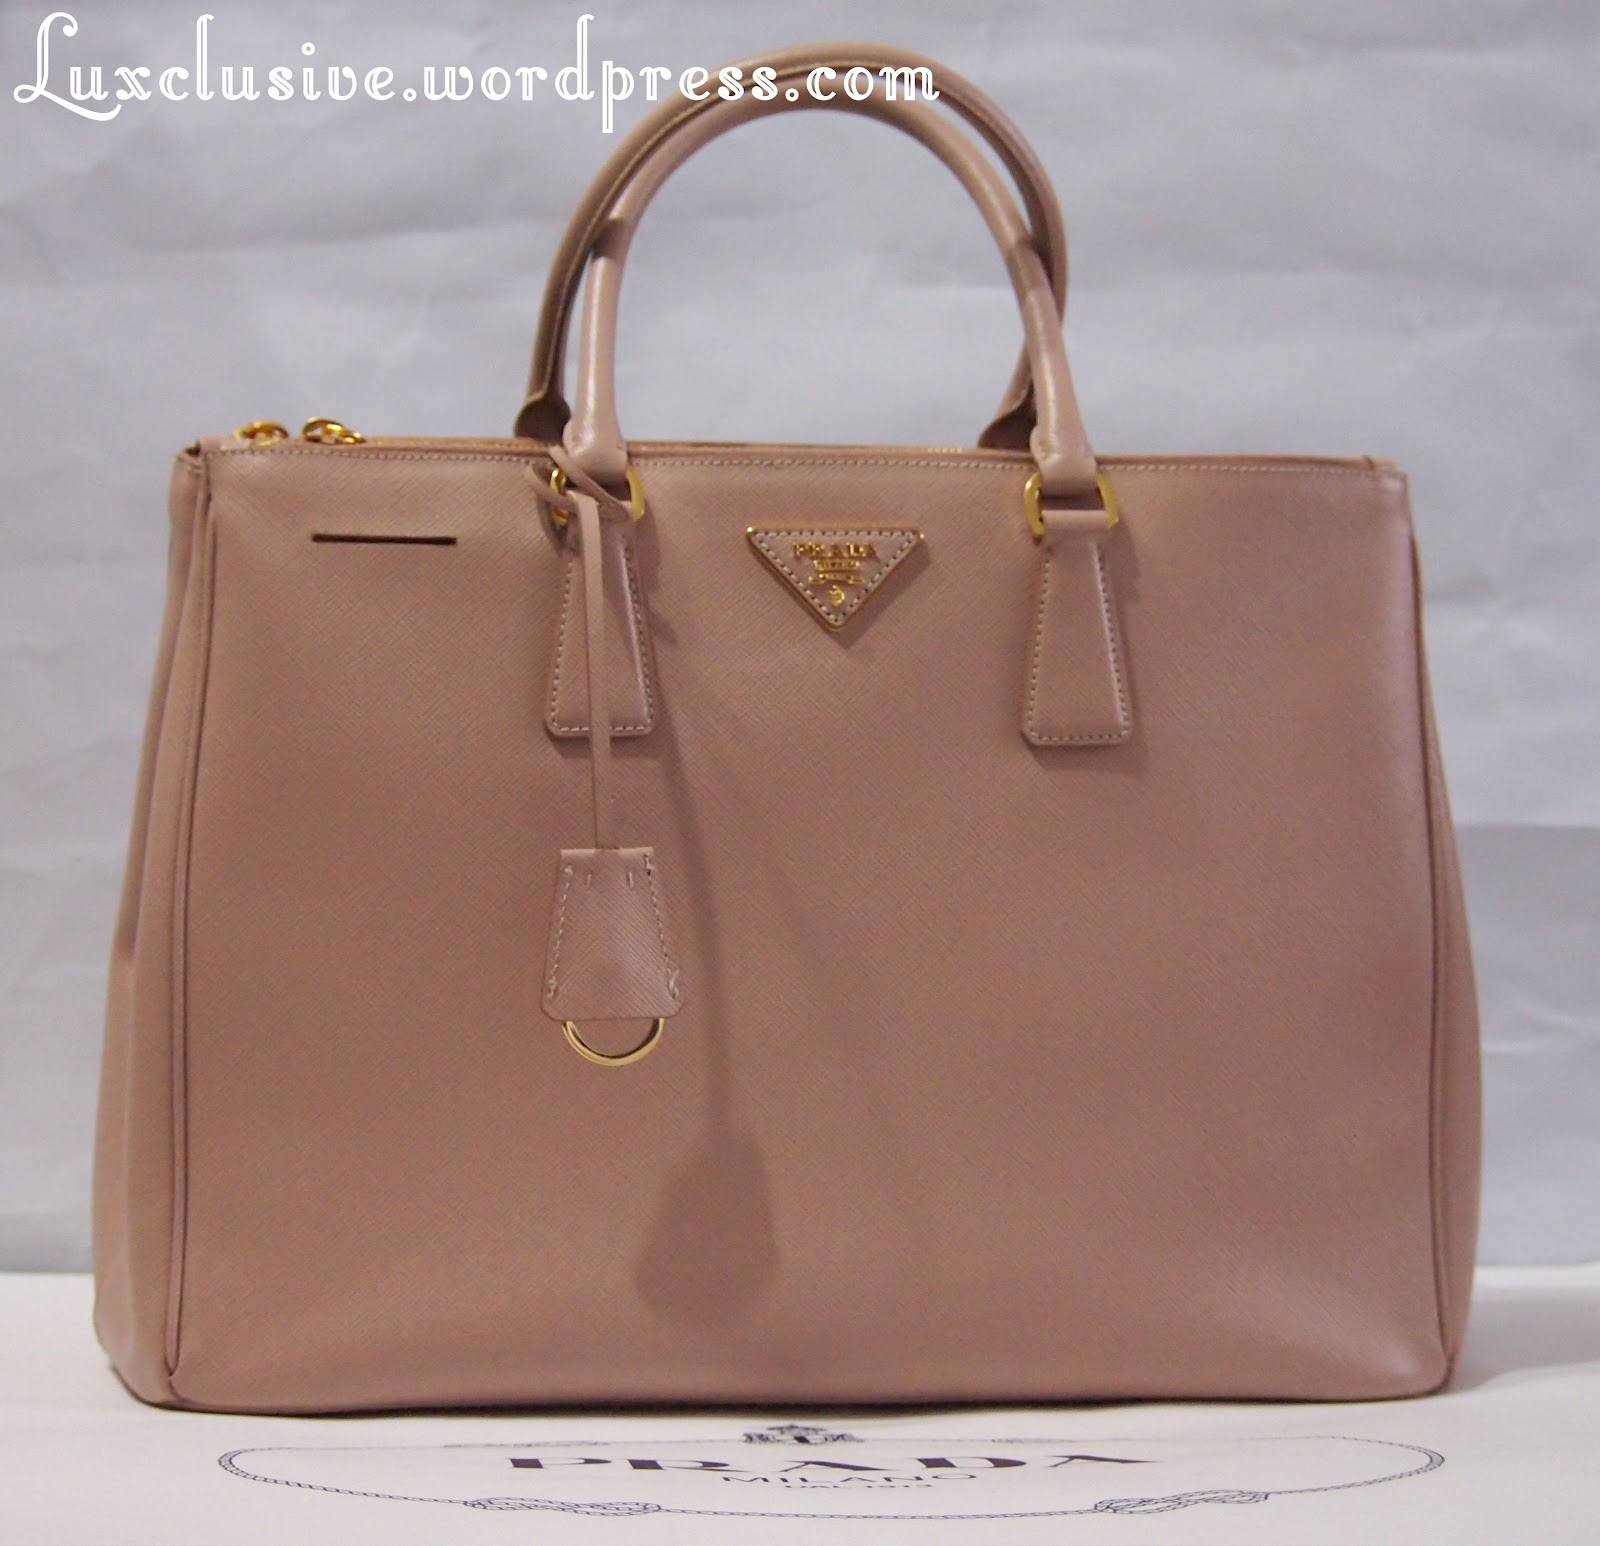 Coach Prada Handbag Outlet Locations – Coach Factory Outlet Store | measlyqualm4822